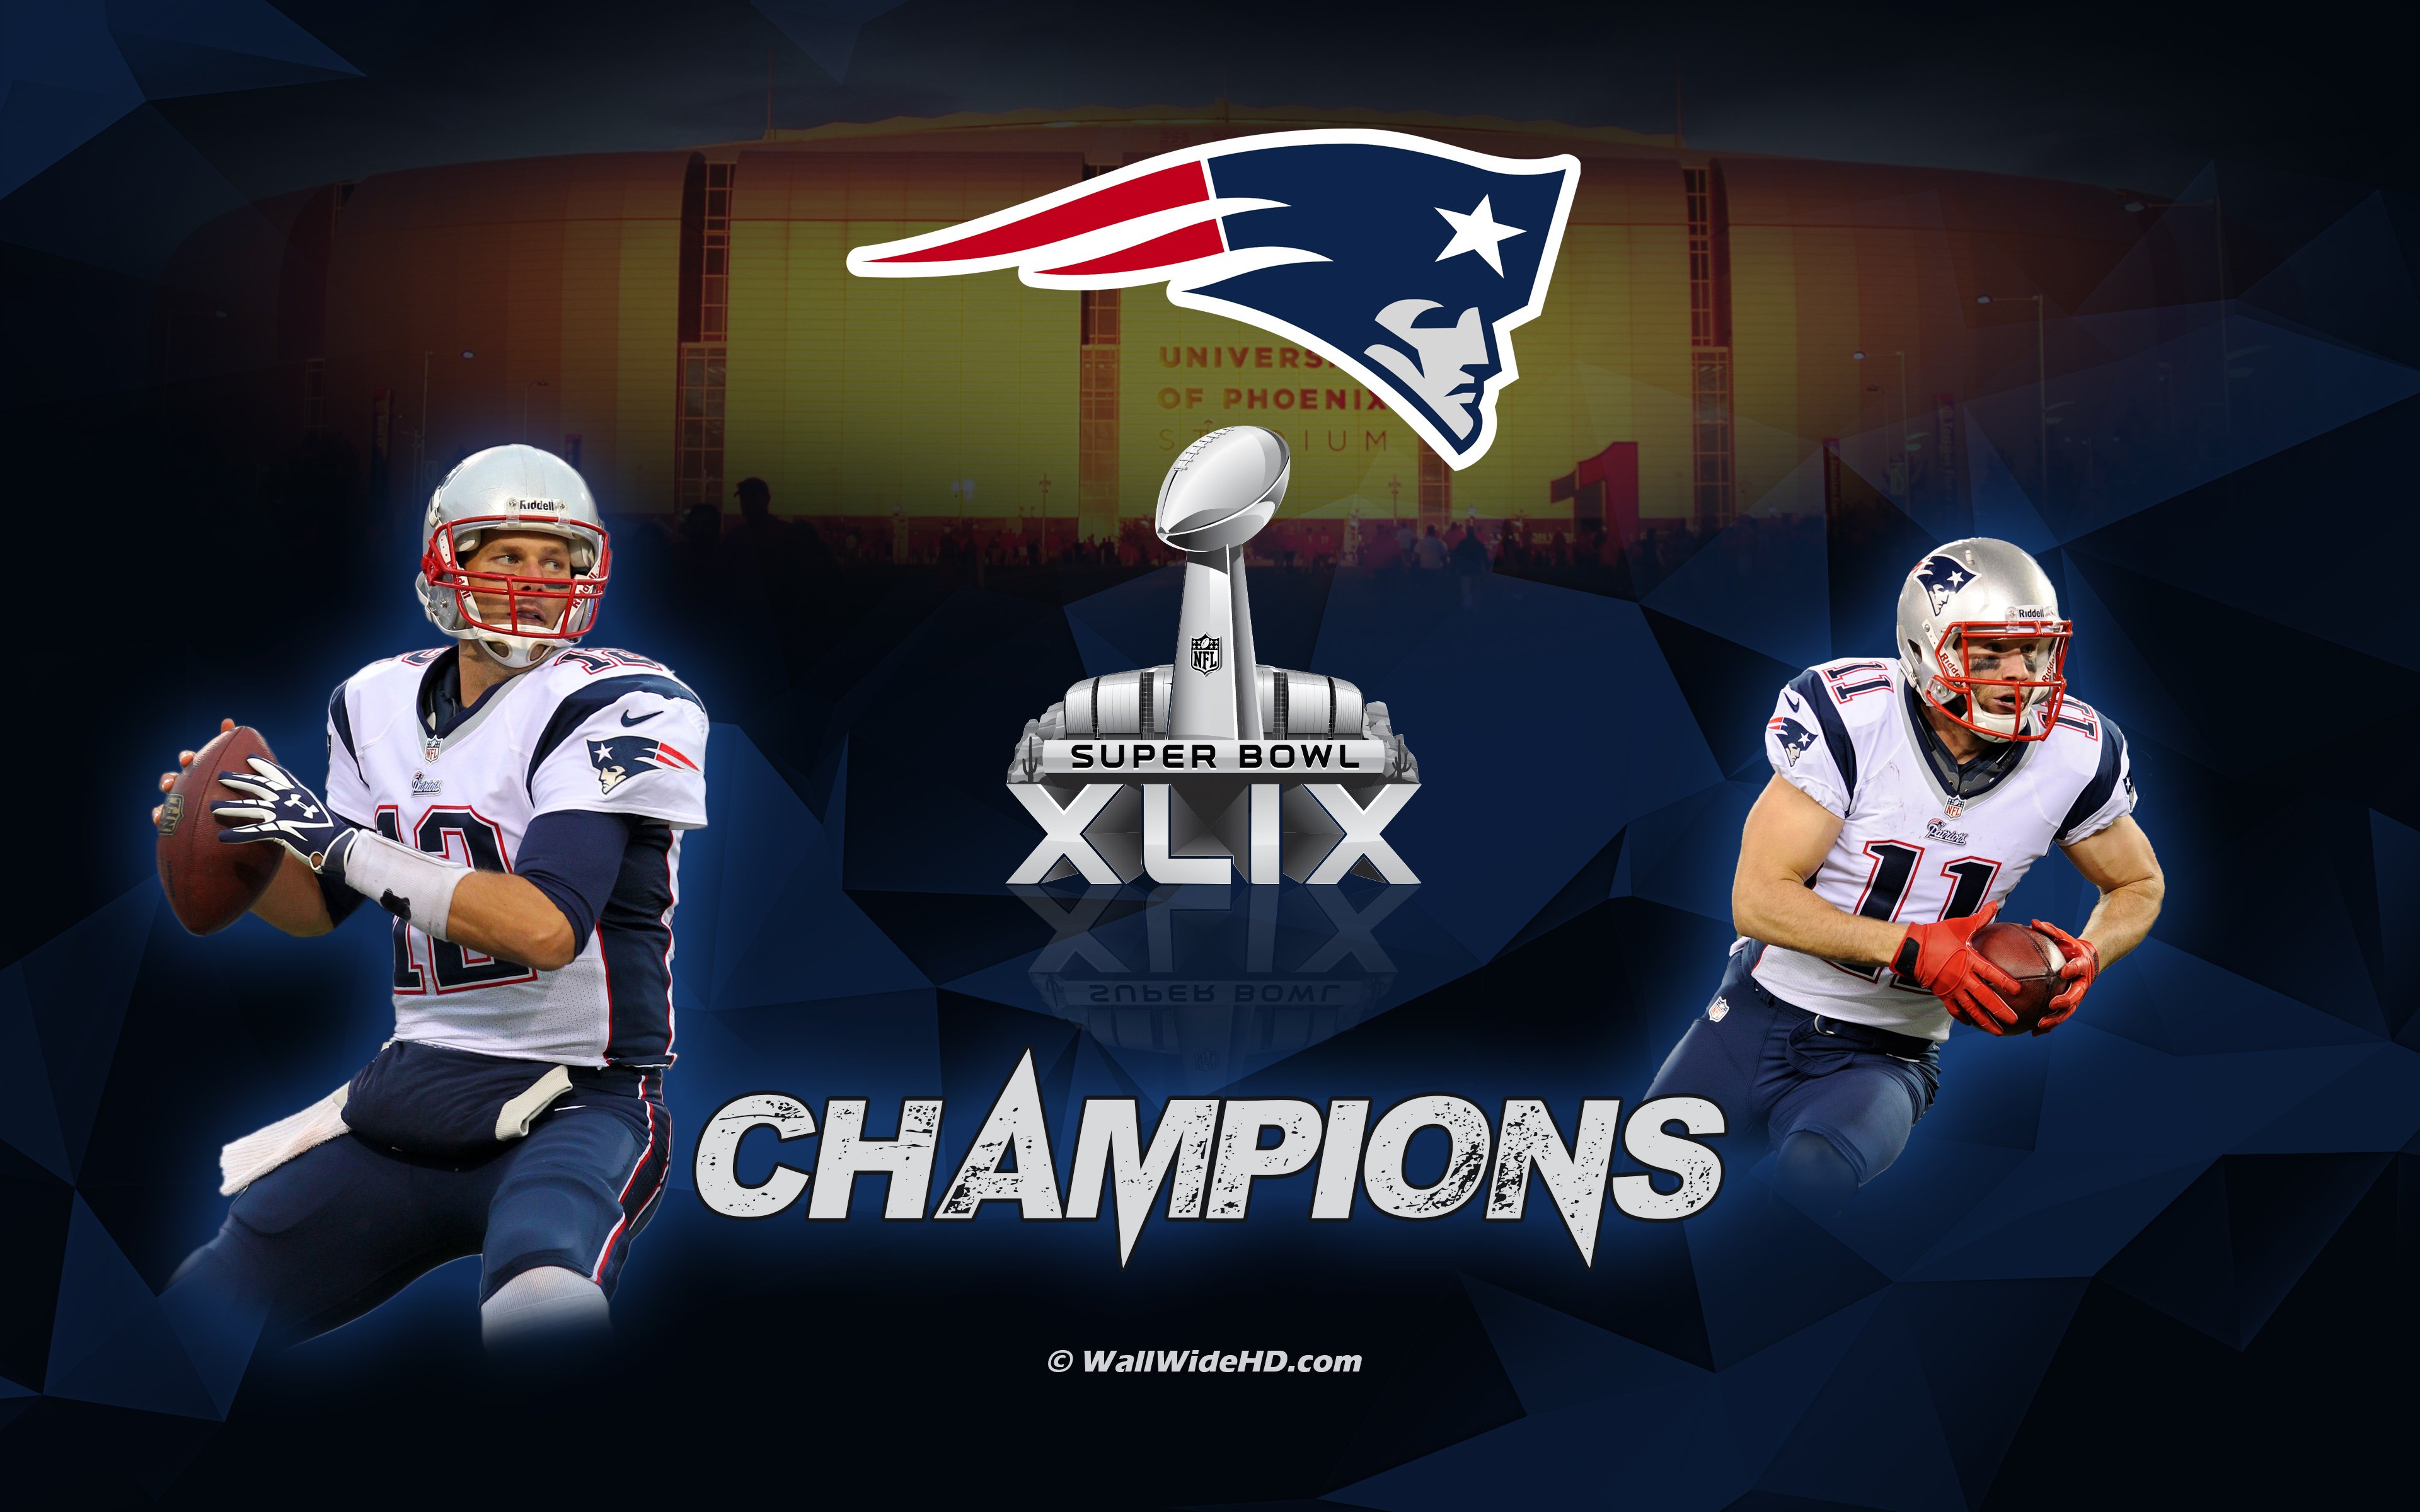 SUPER BOWL 2016 WALLPAPERS FREE Wallpapers Background images 3840x2400